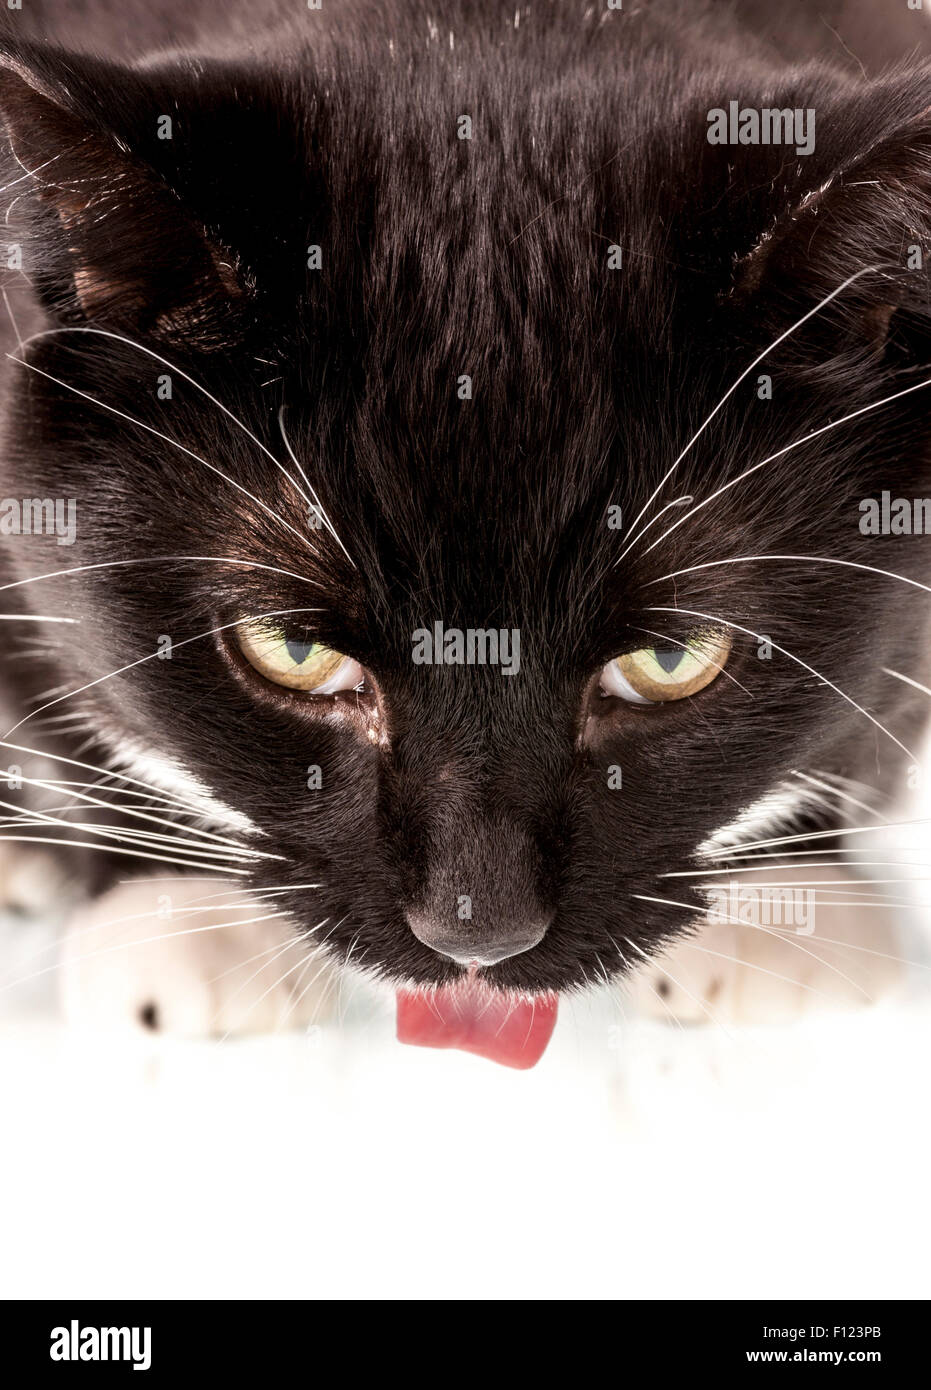 Close up of black and white domestic cat's head and tongue Stock Photo